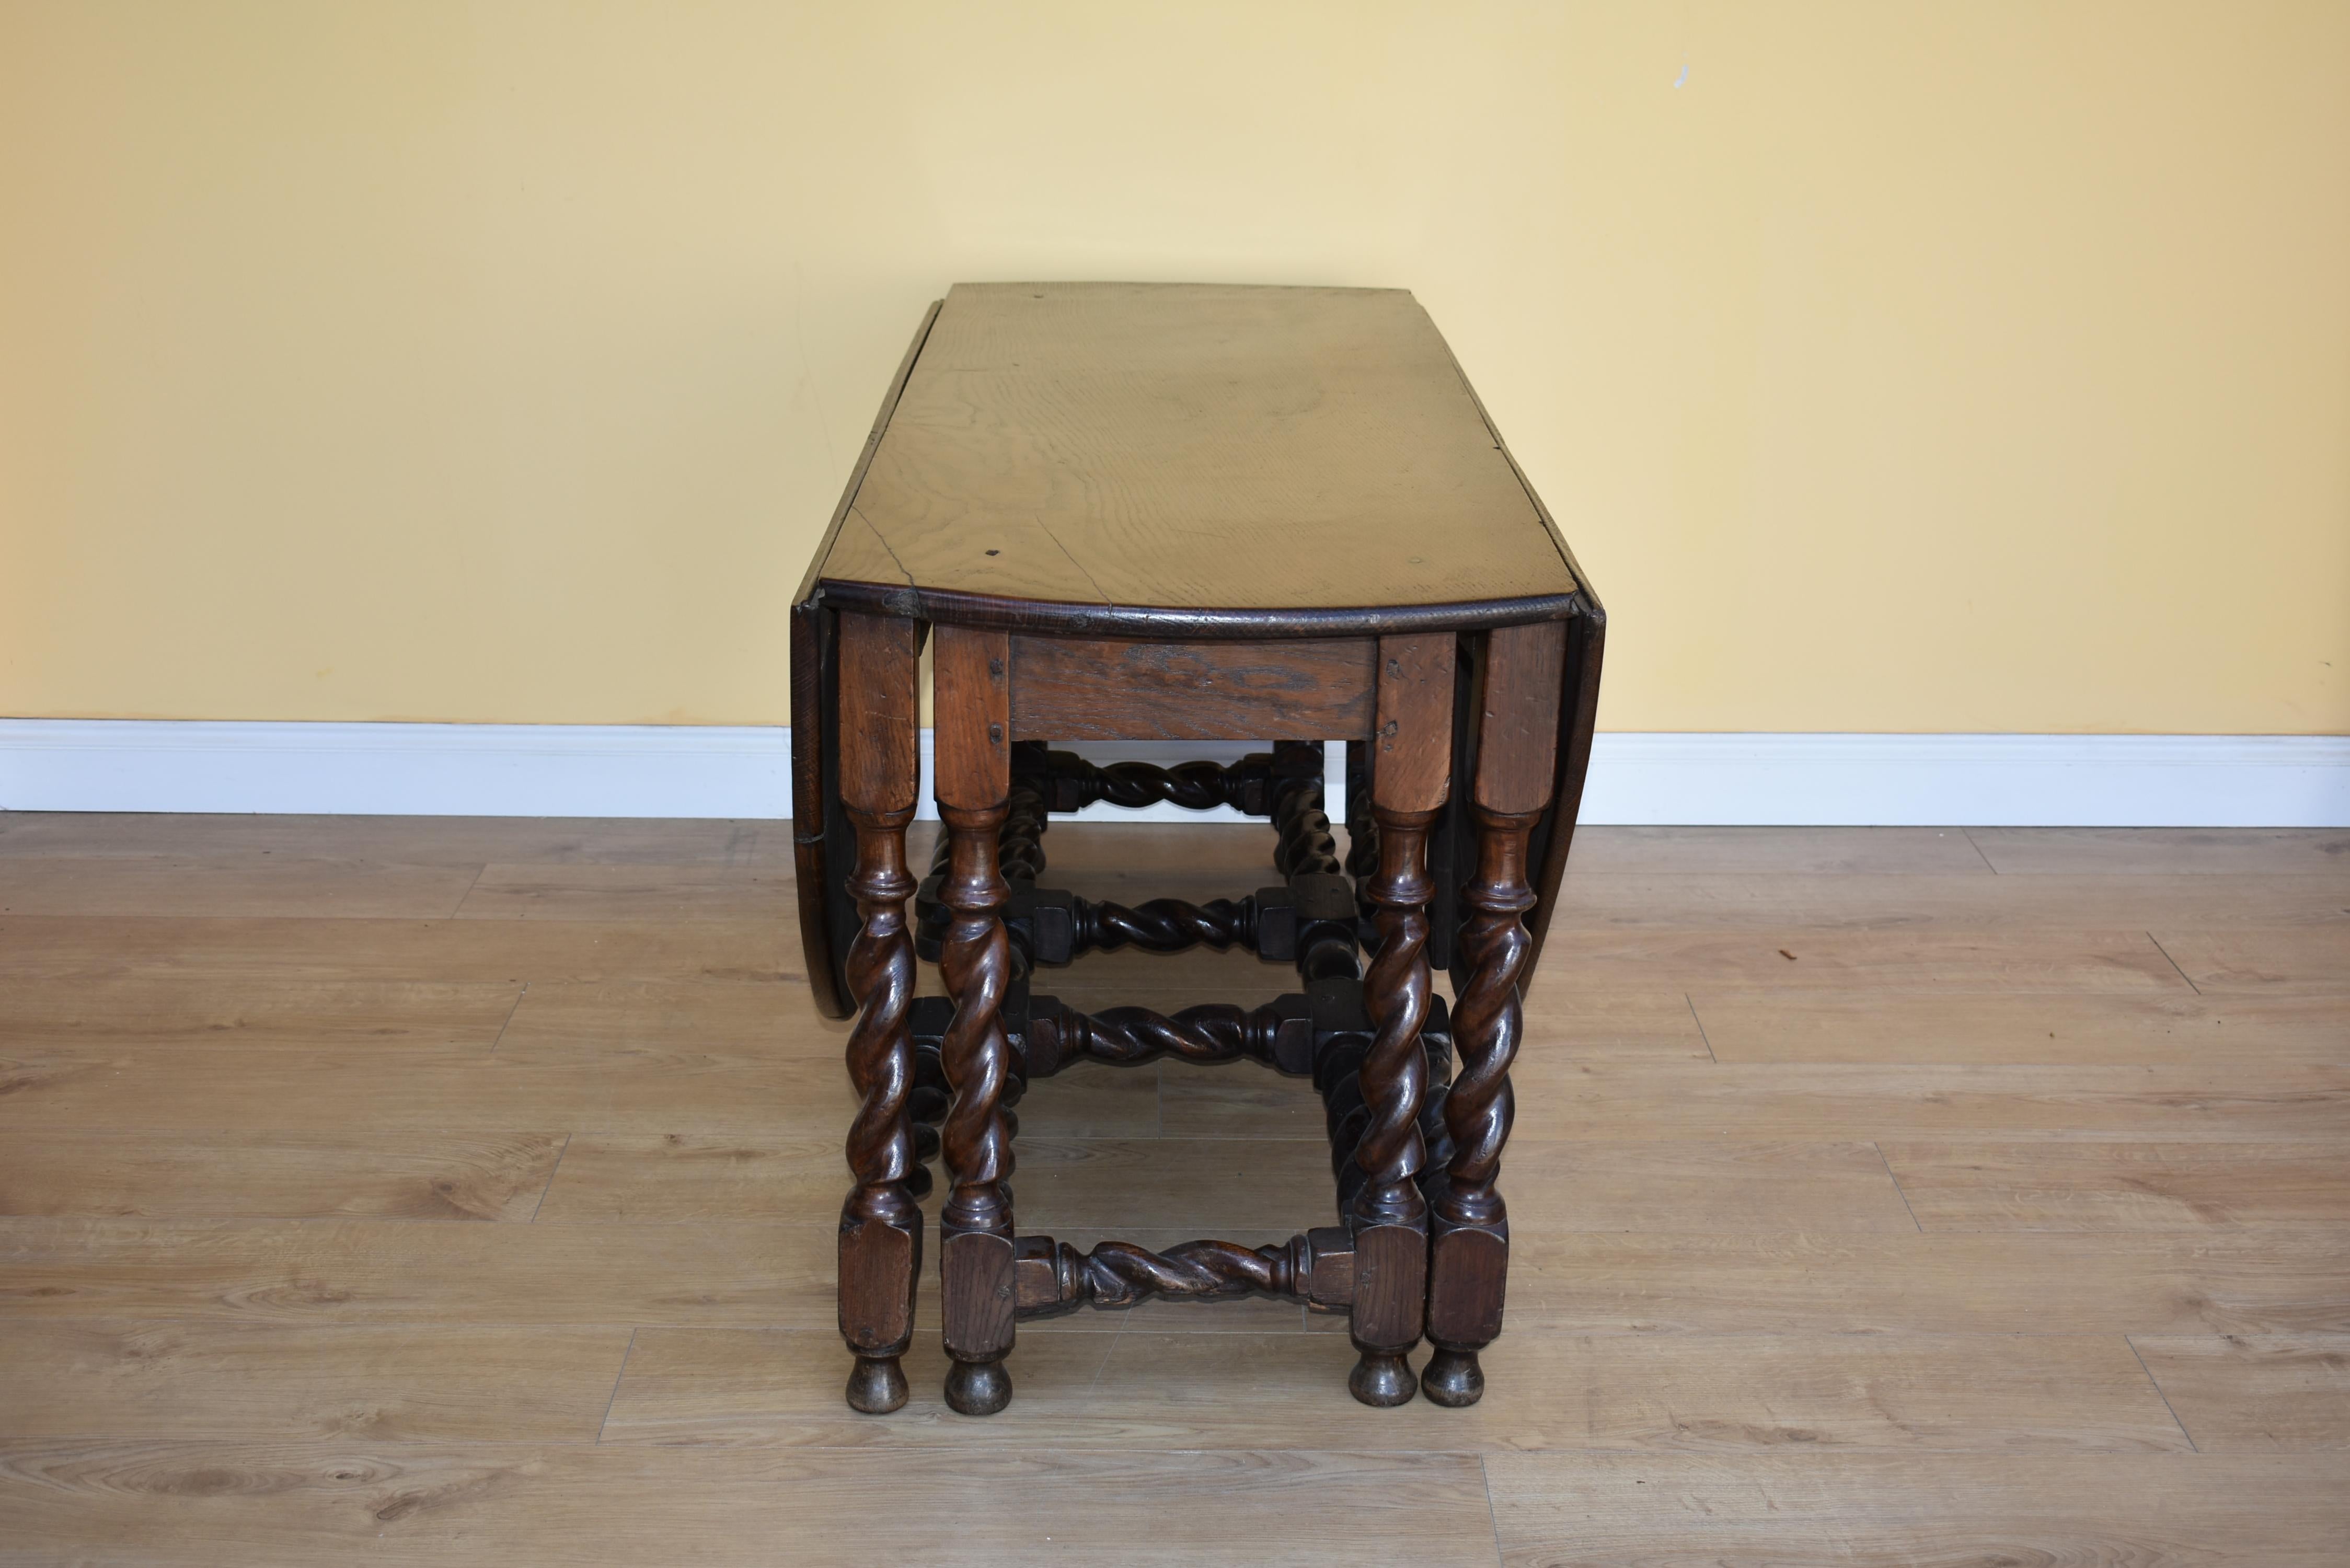 For sale is a good quality early 19th century double gateleg table. The solid oak top above nicely turned barley twist legs, the two flaps supported by a double gate when open. There are historical signs of shrinkage, though these were repaired